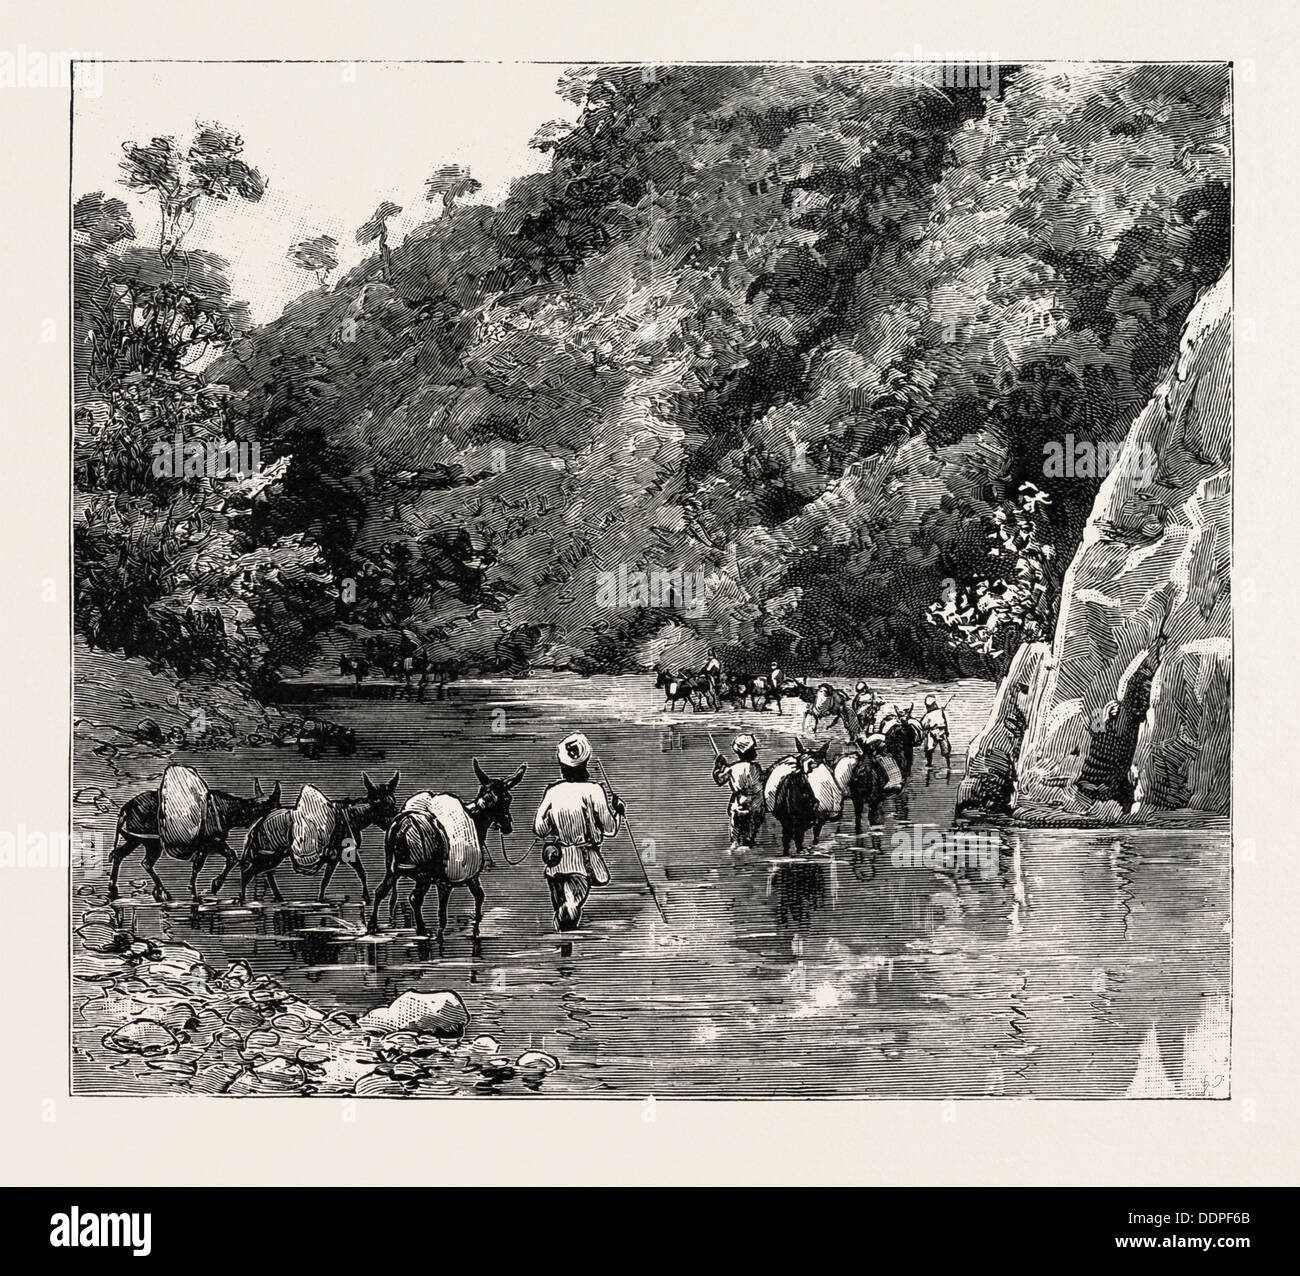 THE CHIN LUSHAI EXPEDITIONARY FORCE, A MULE CONVOY CROSSING THE LOUNG GUT CHOUNG STREAM, engraving 1890 Stock Photo